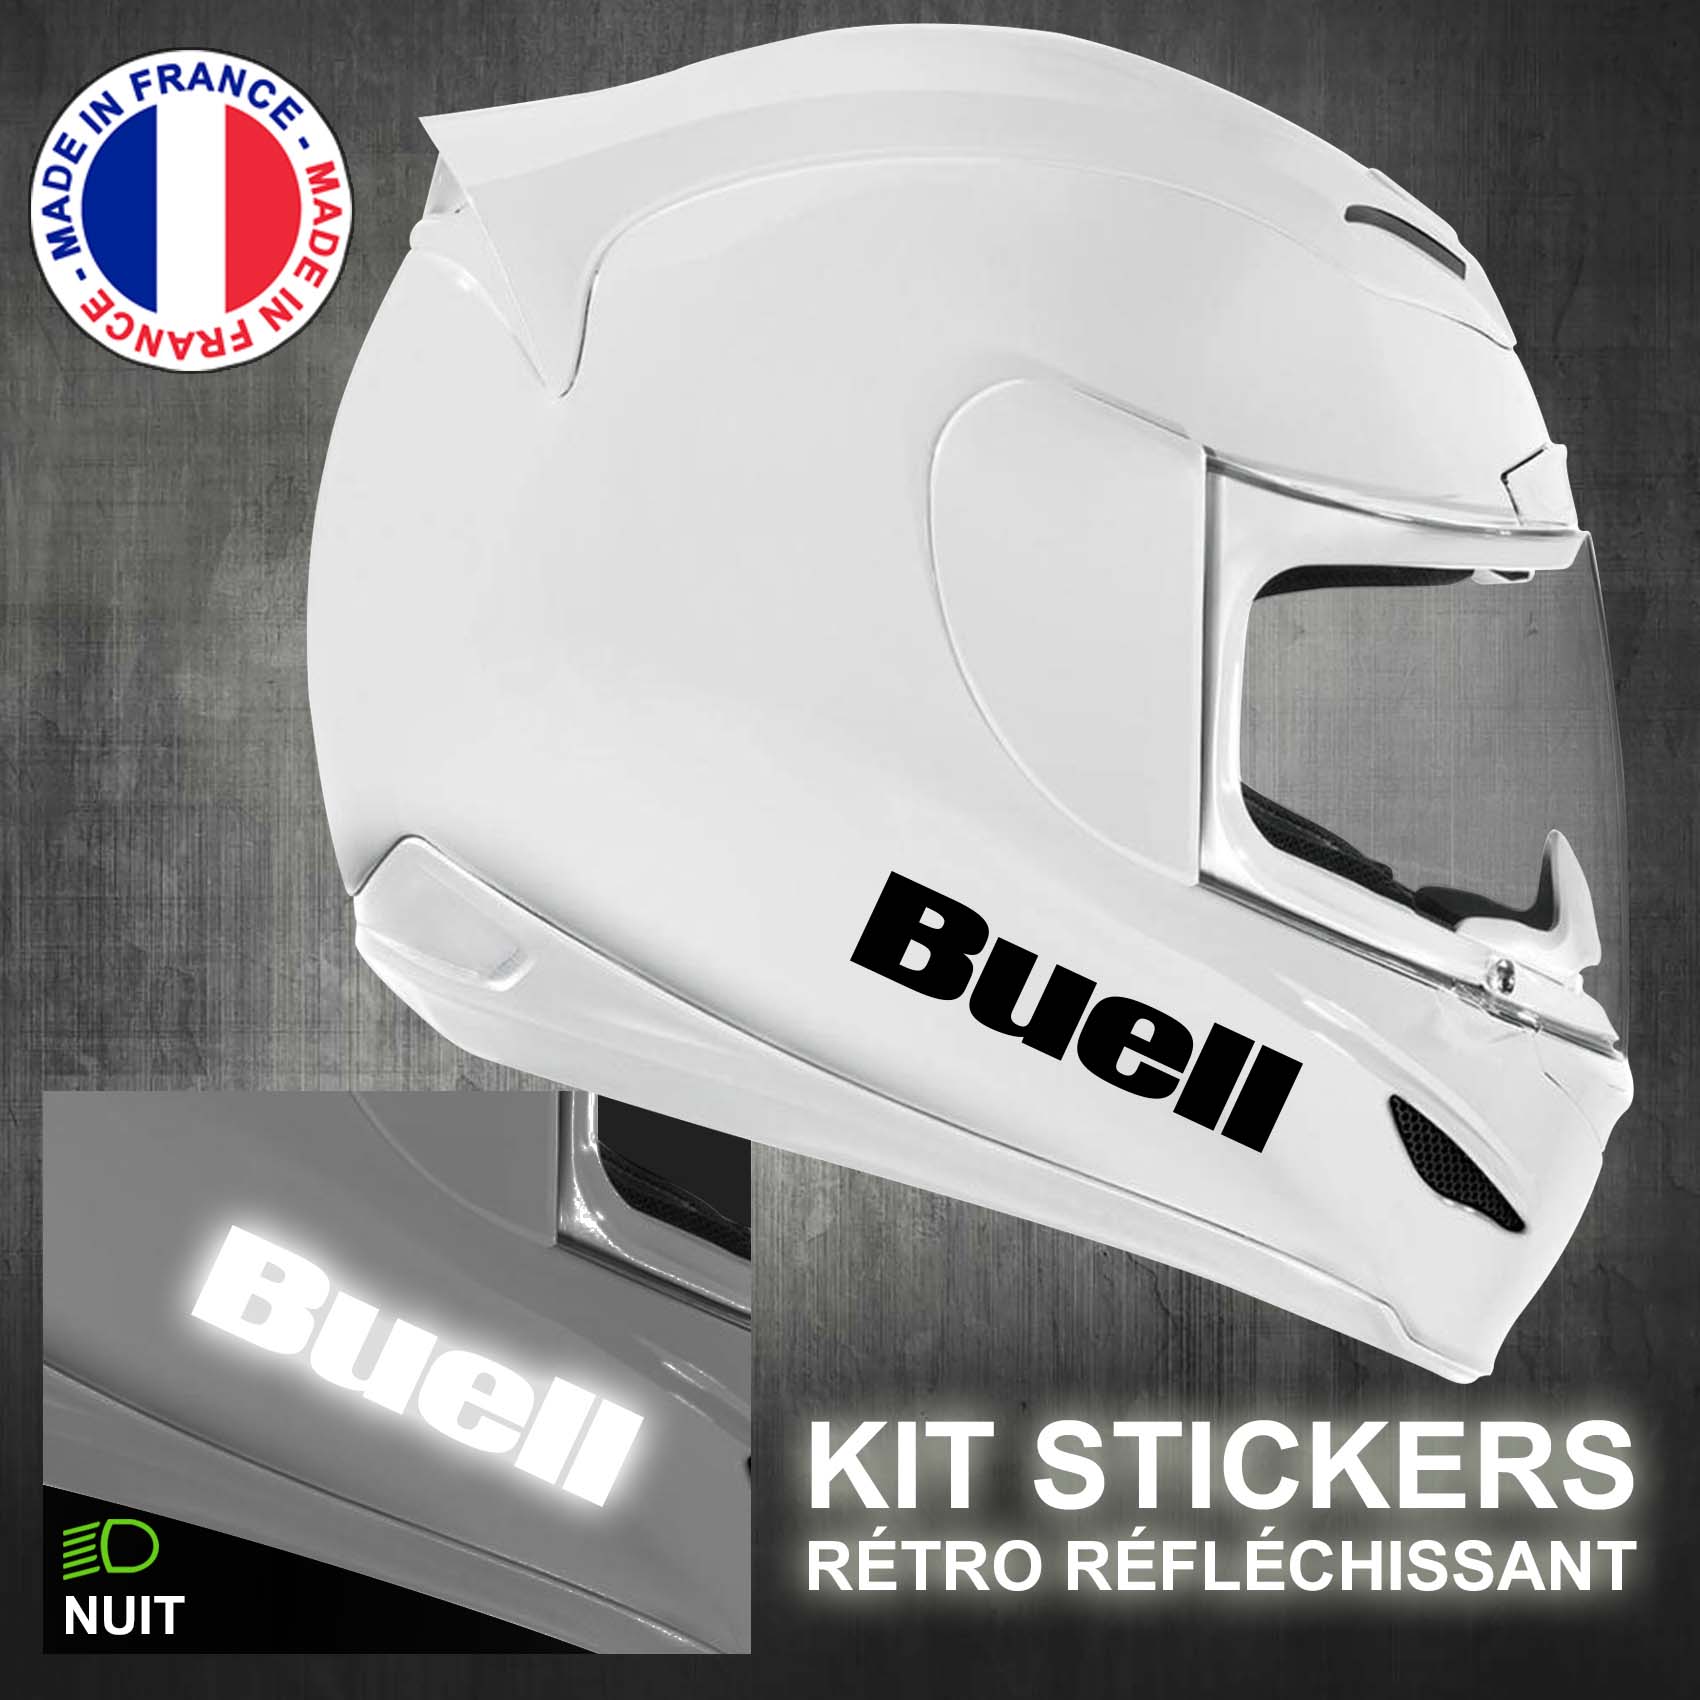 stickers-casque-moto-buell-ref2-retro-reflechissant-autocollant-moto-velo-tuning-racing-route-sticker-casques-adhesif-scooter-nuit-securite-decals-personnalise-personnalisable-min